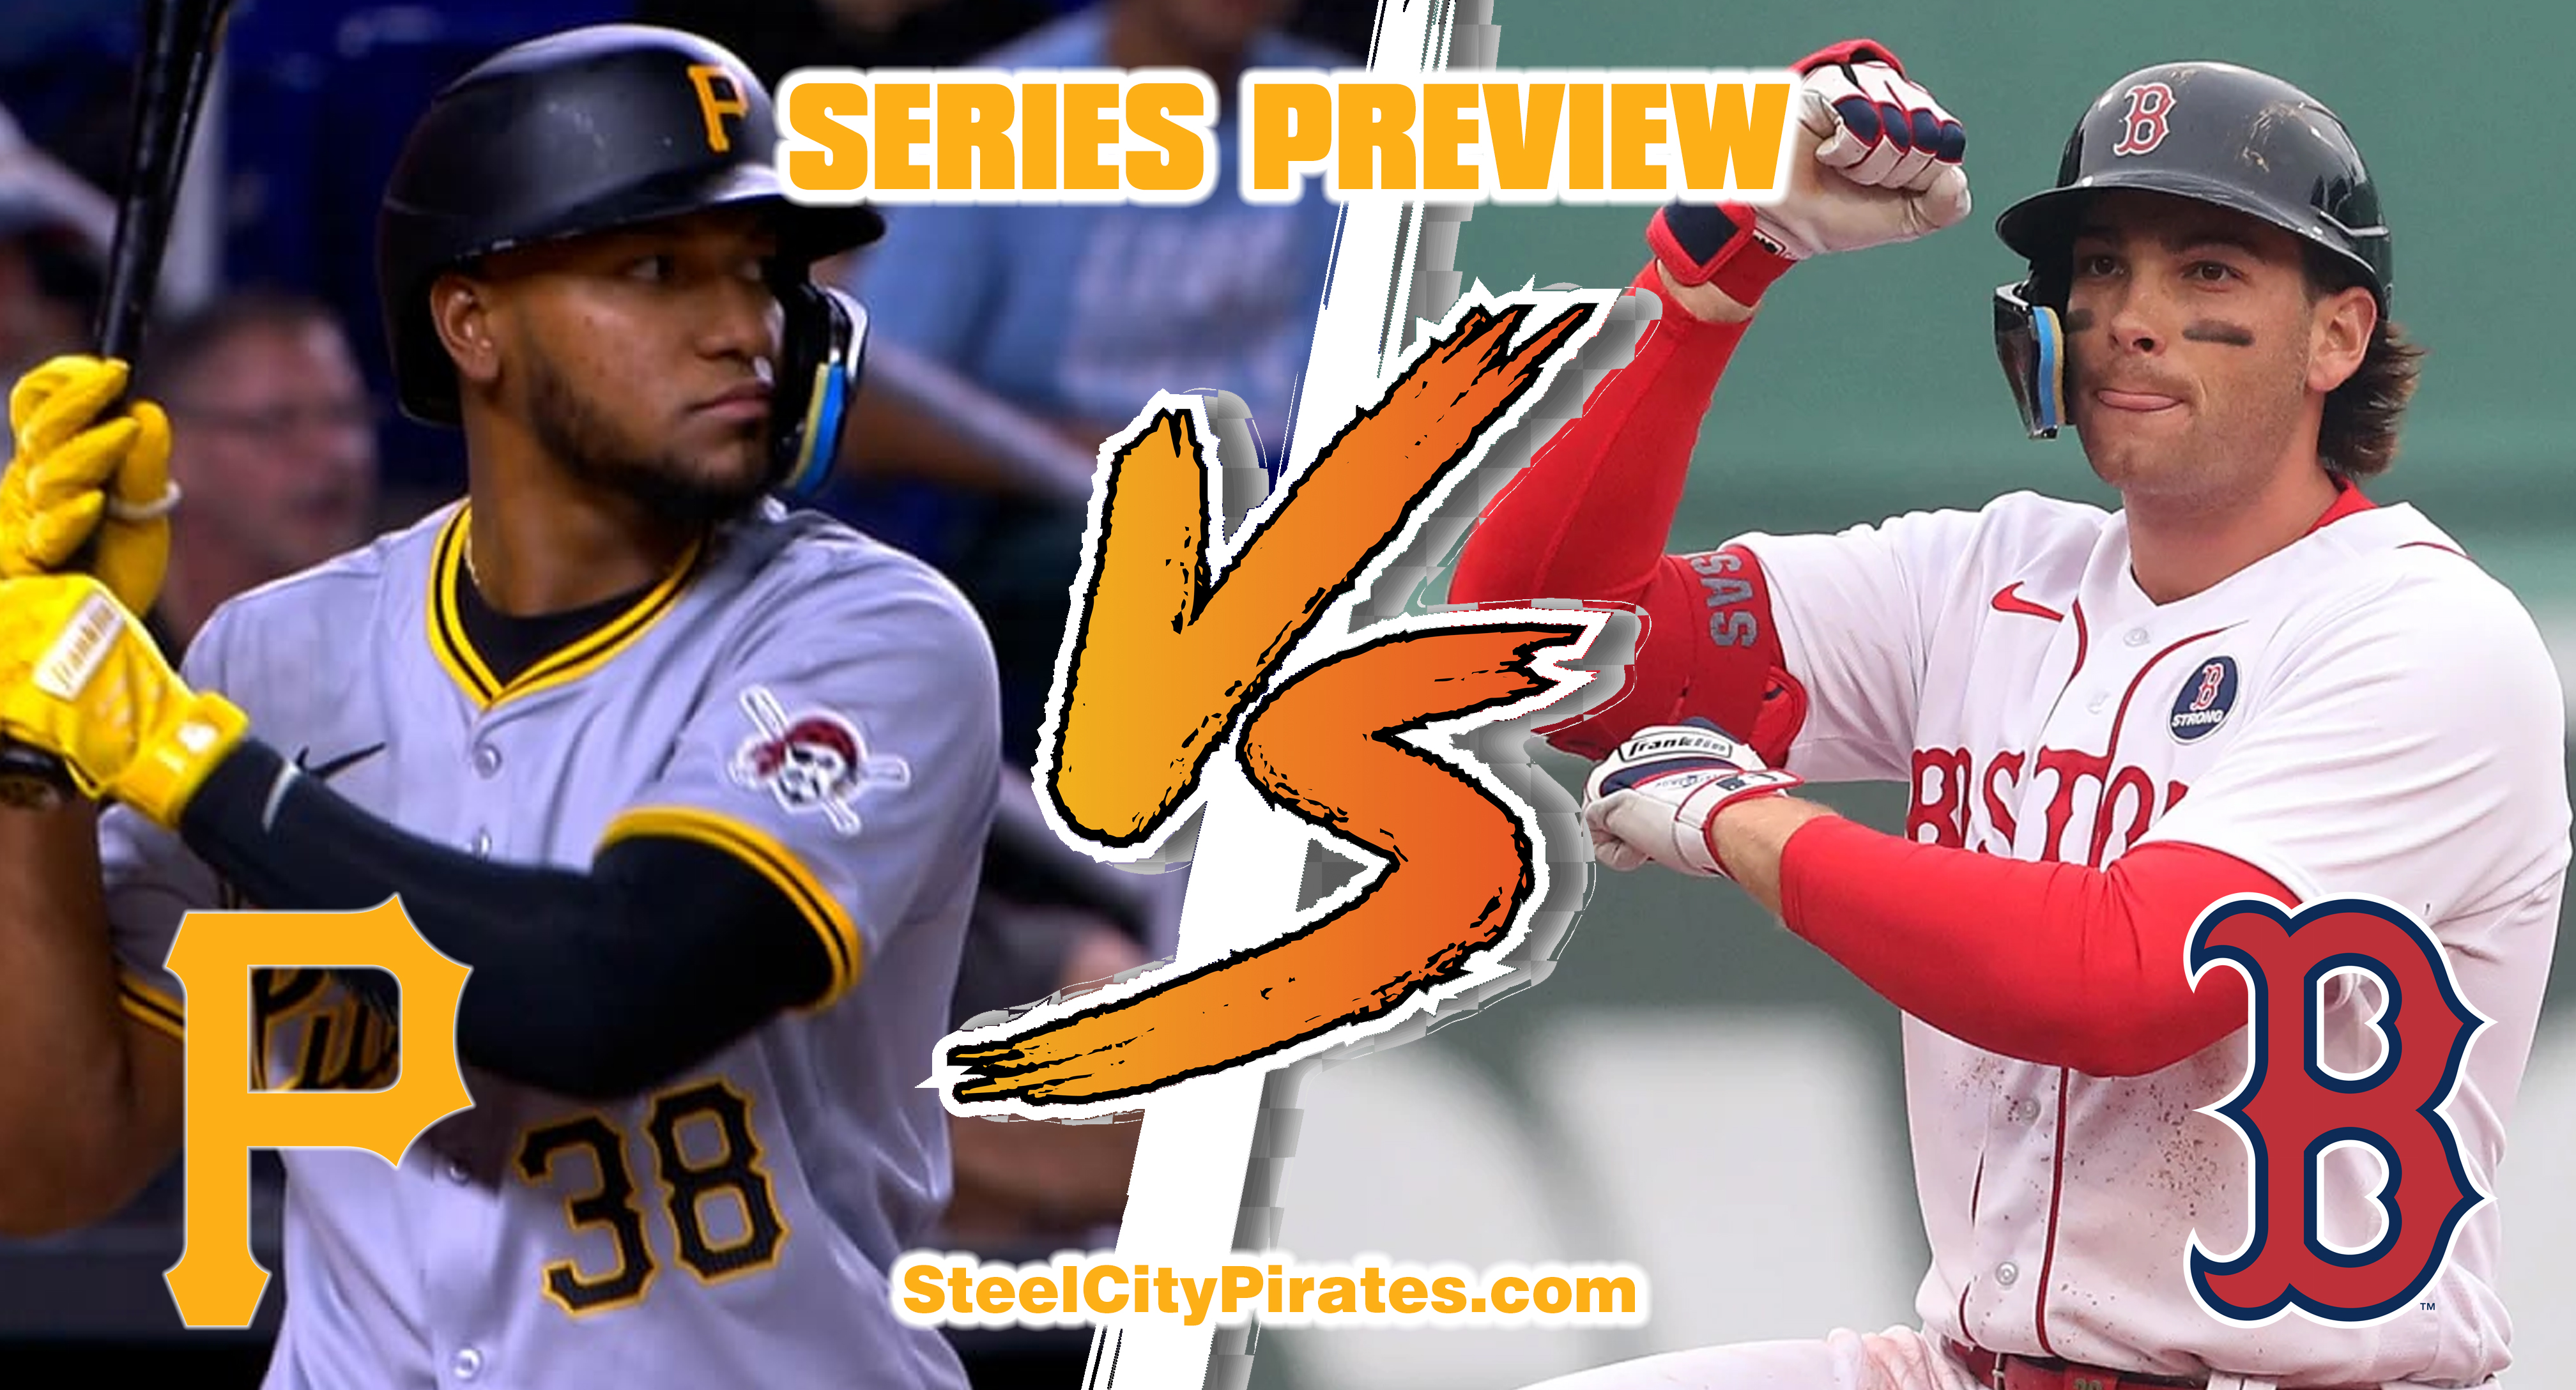 Series Preview: Red Sox (10-10) at Pirates (11-8)